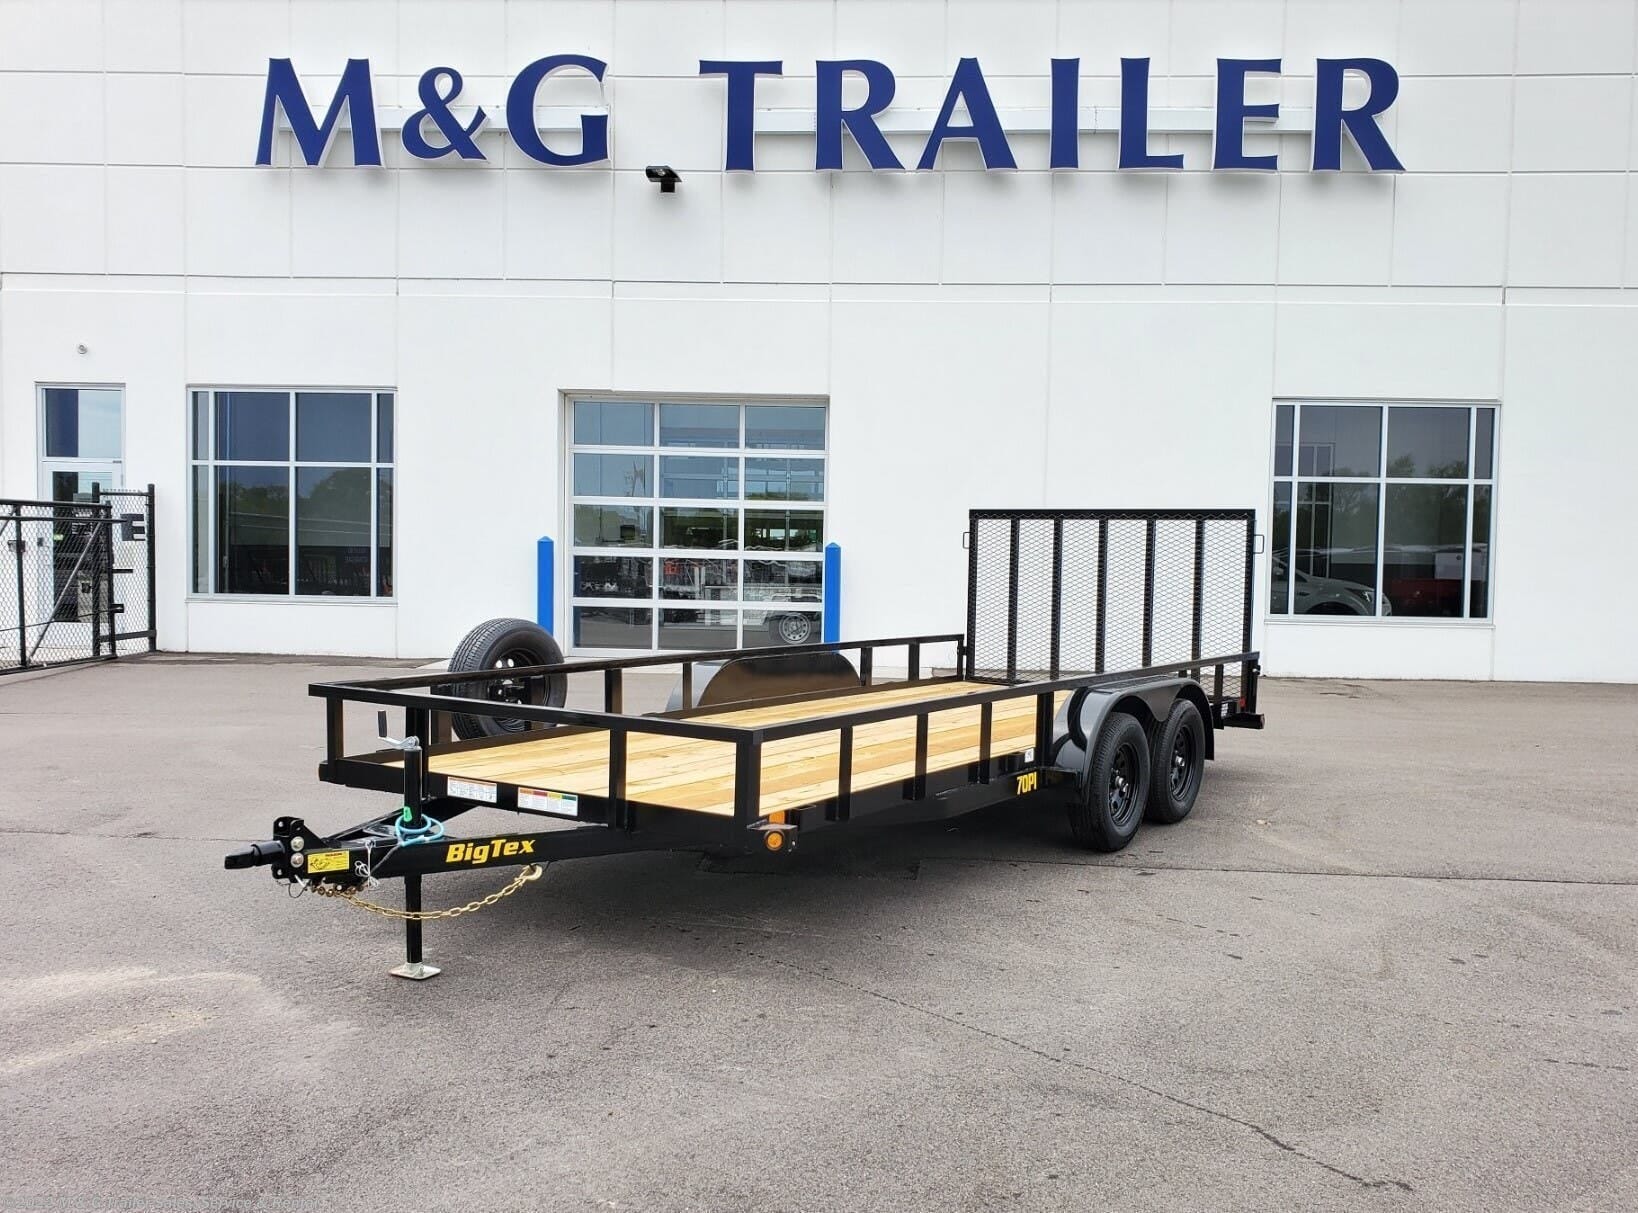 A Big Tex trailer in stock at M&G.